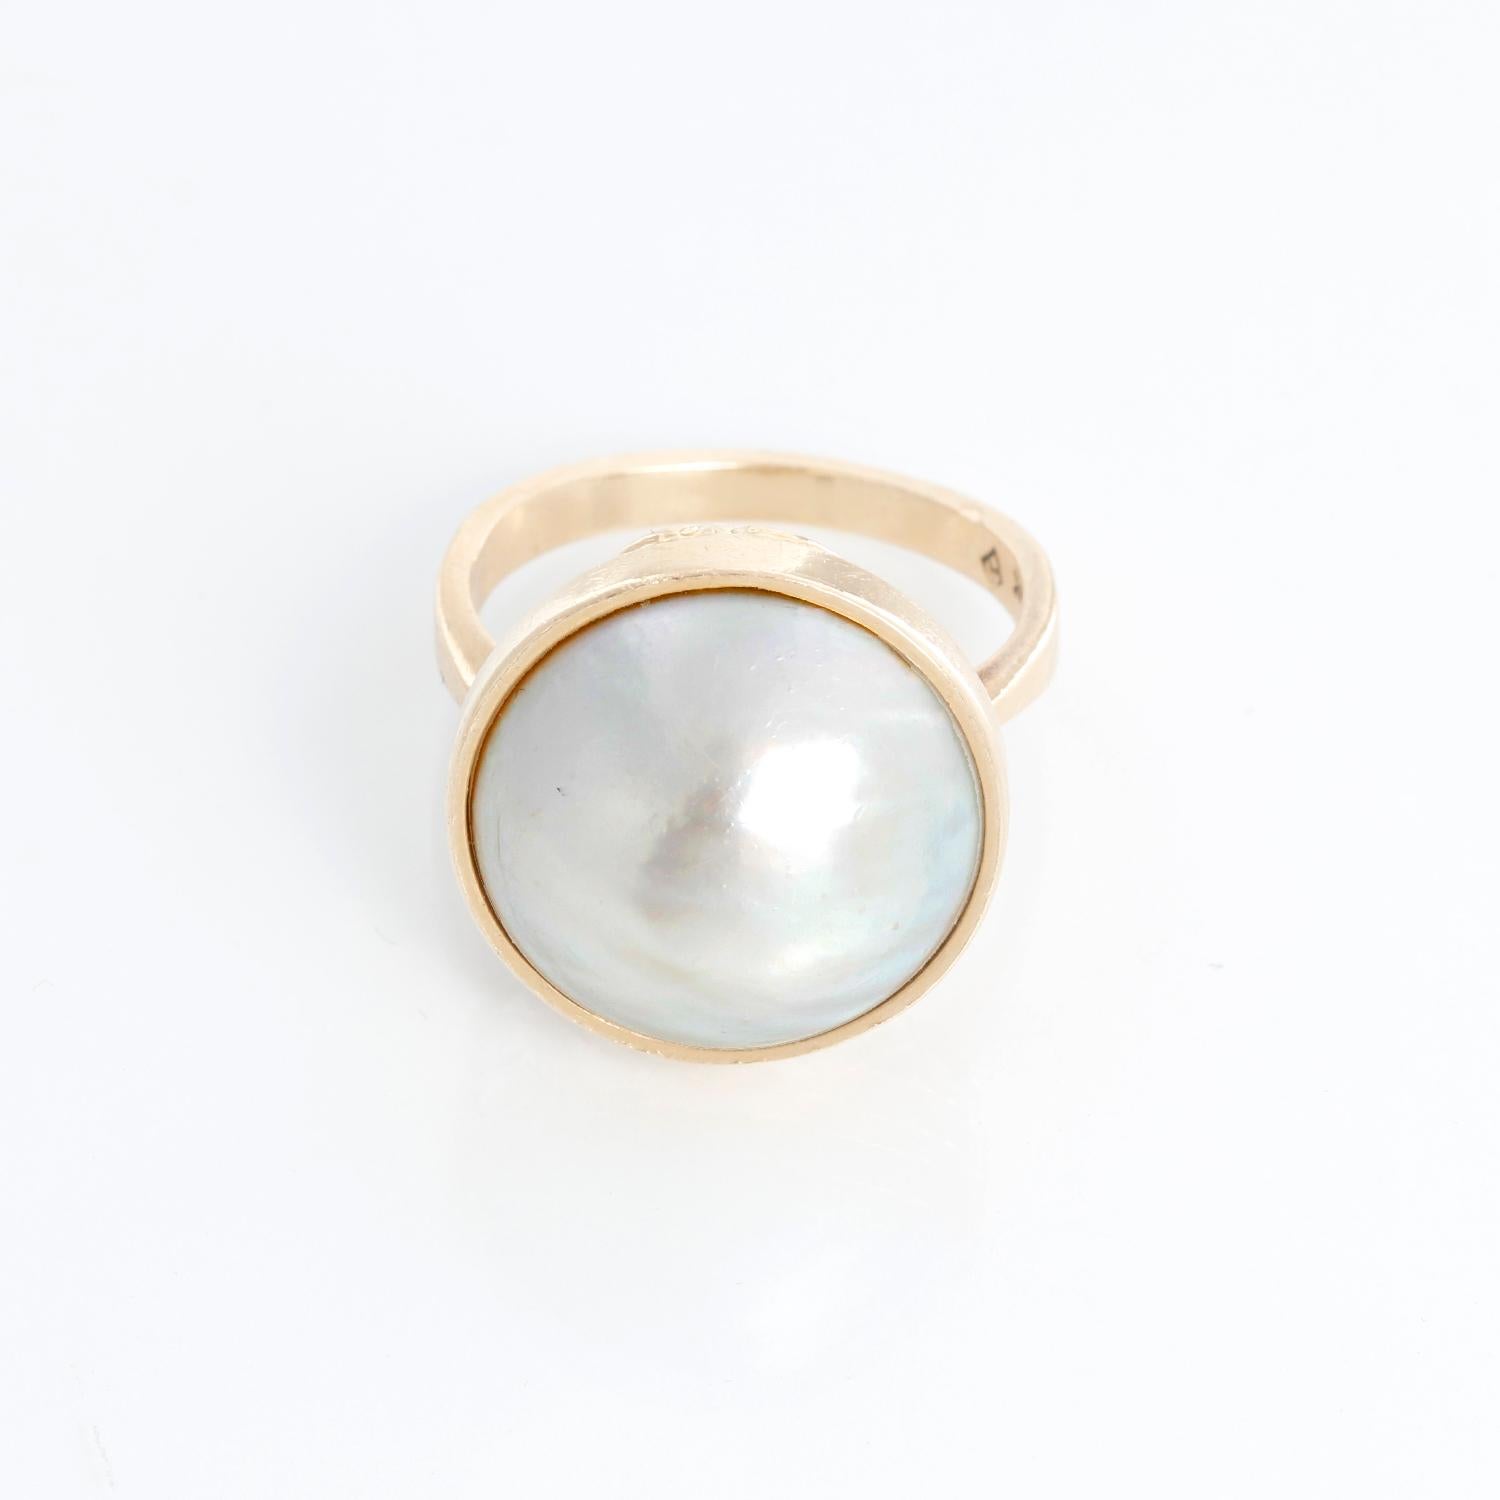 14K Yellow Gold Pearl Ring Size 7 - Cabochon pearl ring set on 14K yellow gold with intricate design on the side. Pre-owned with pouch.